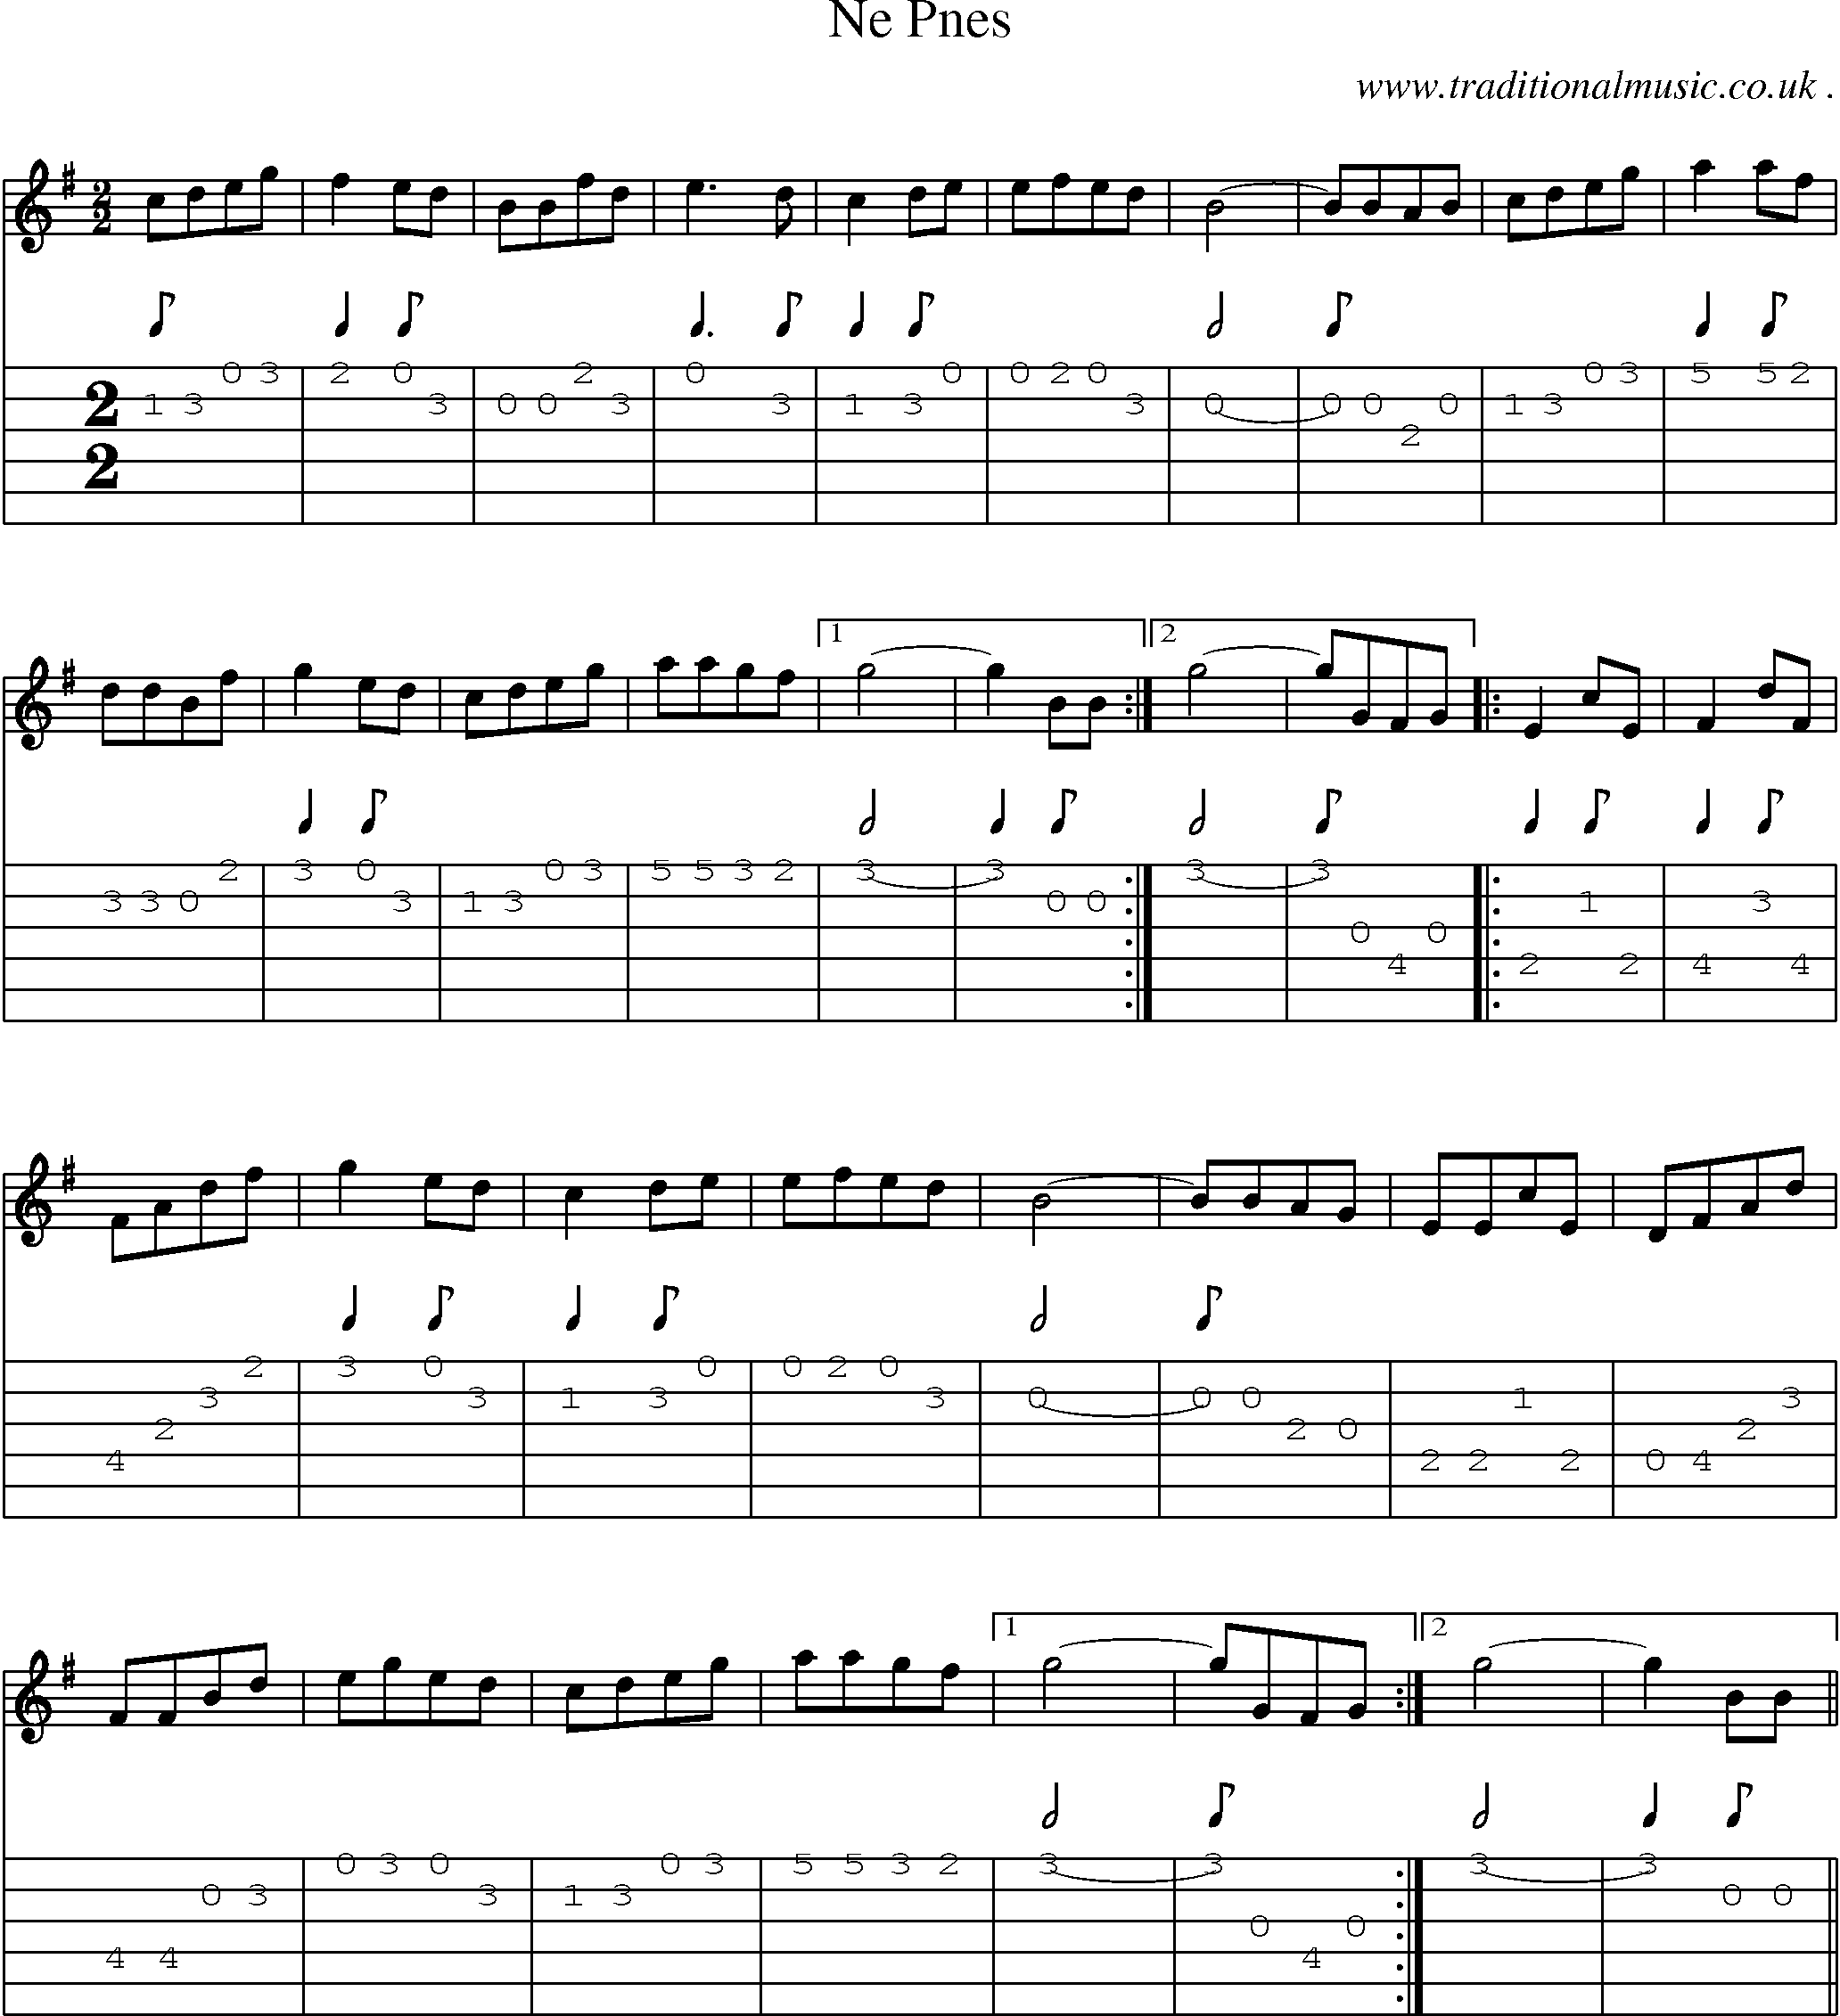 Sheet-Music and Guitar Tabs for Ne Pnes